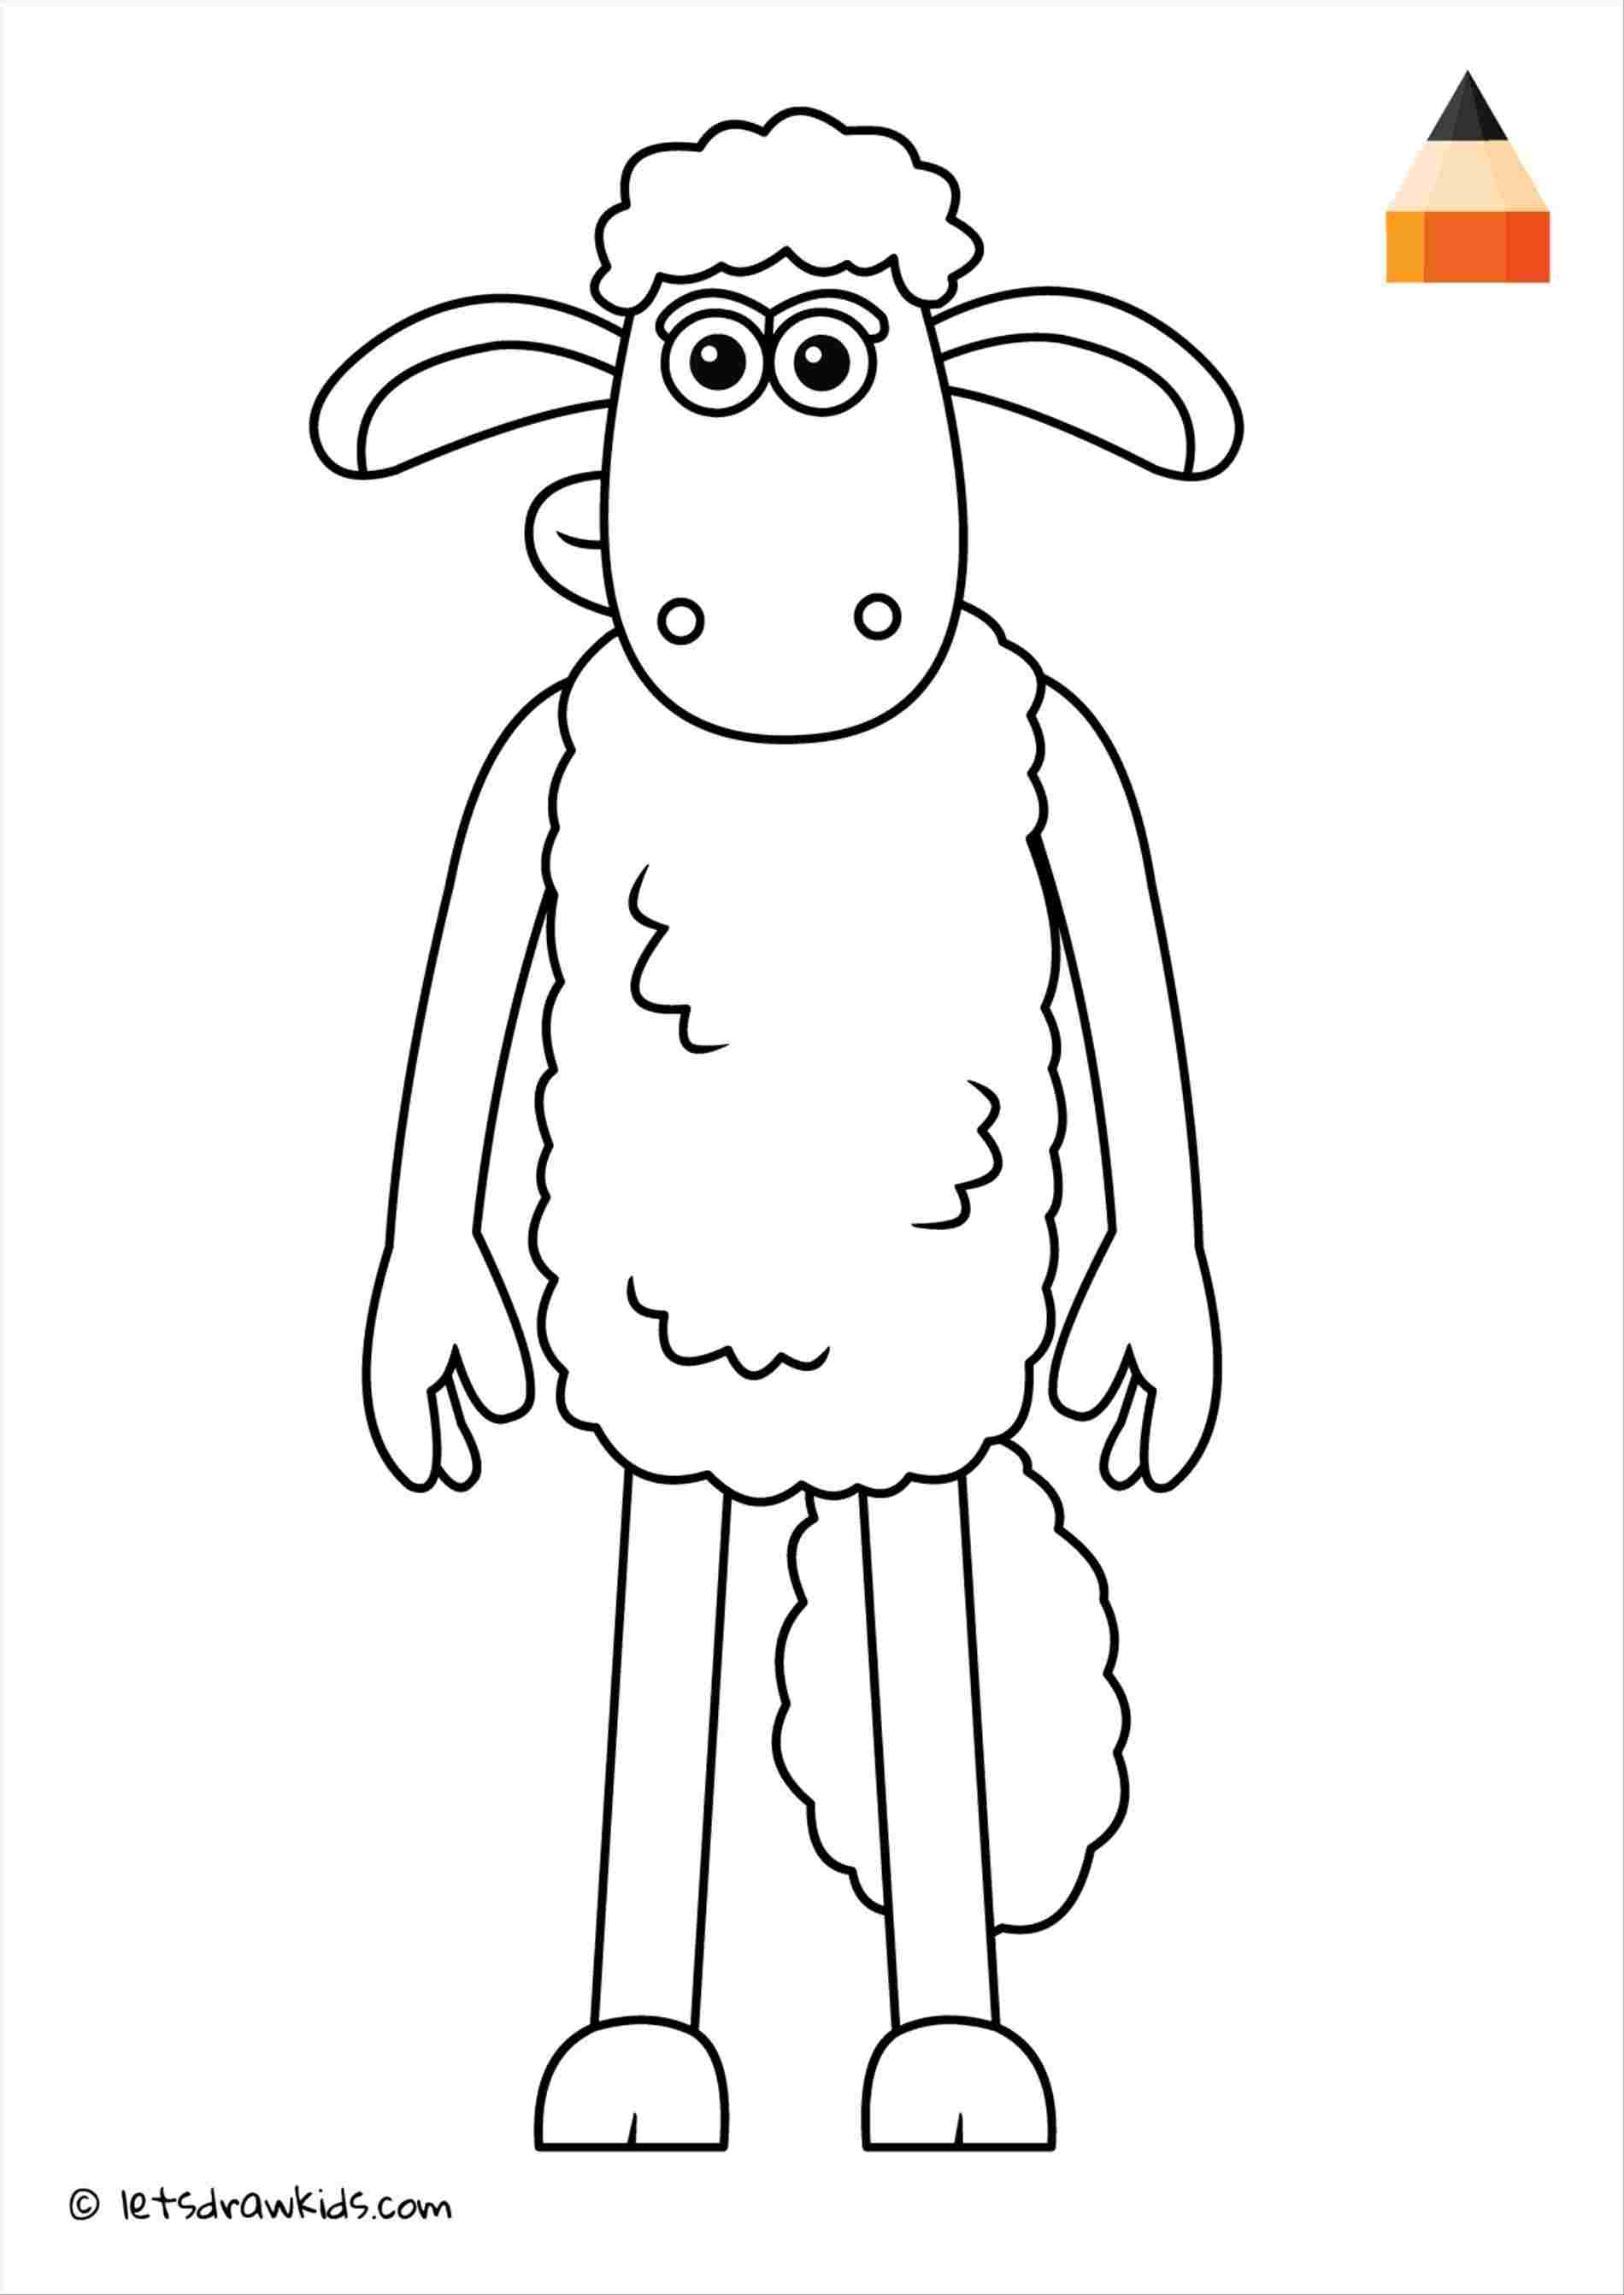 Sheep Face Coloring Page Rhpinterestcom Coloring Page Pages Letus Kids Rhpinterestcouk